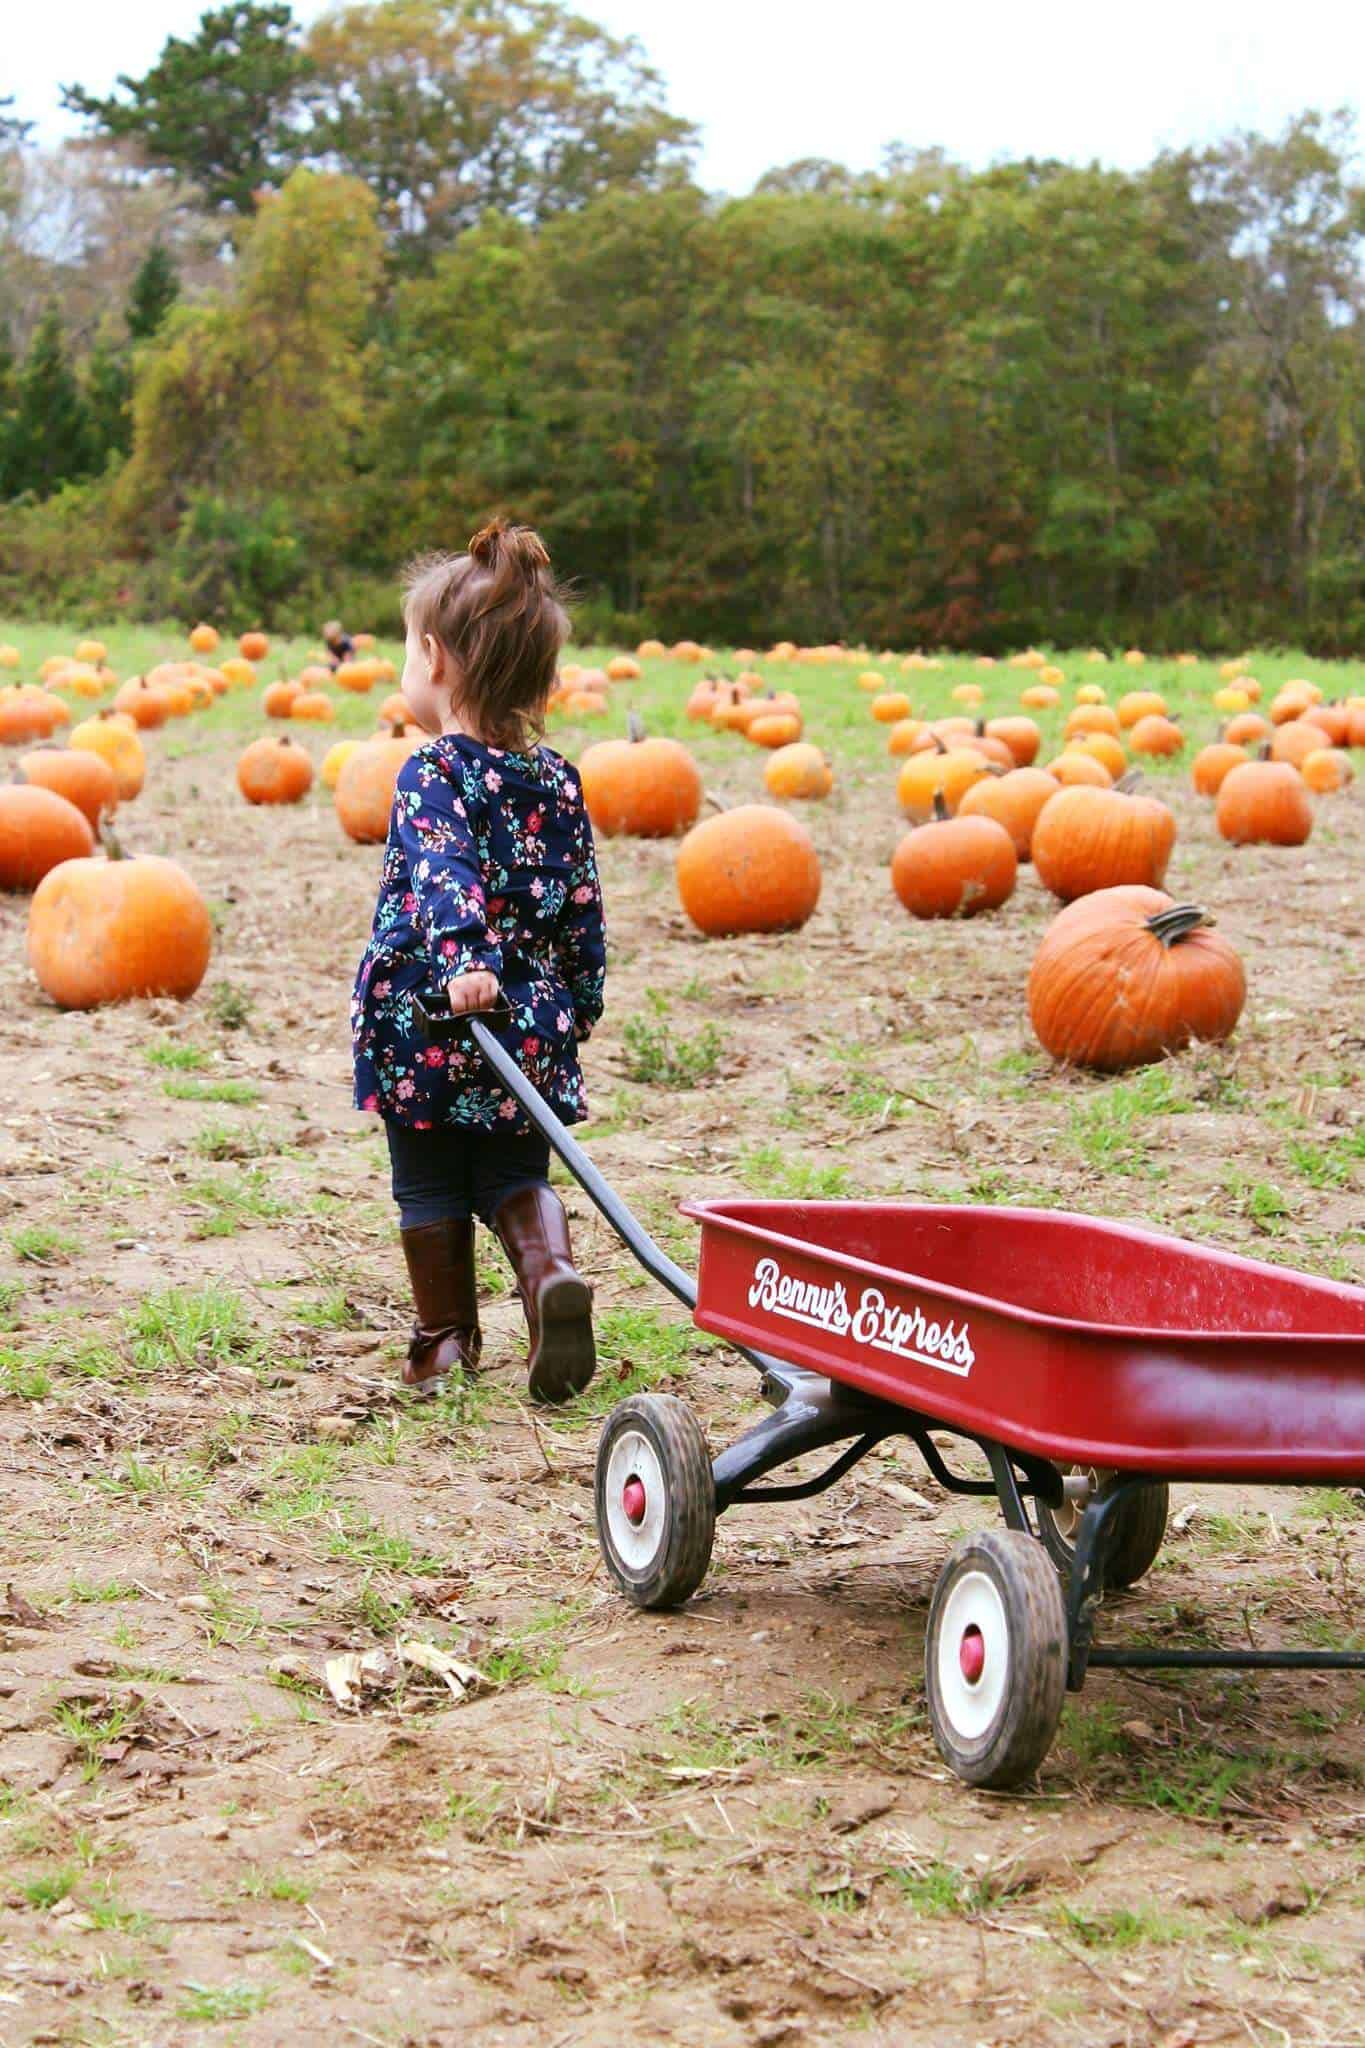 Toddler girl pulls red wagon in pumpkin patch.